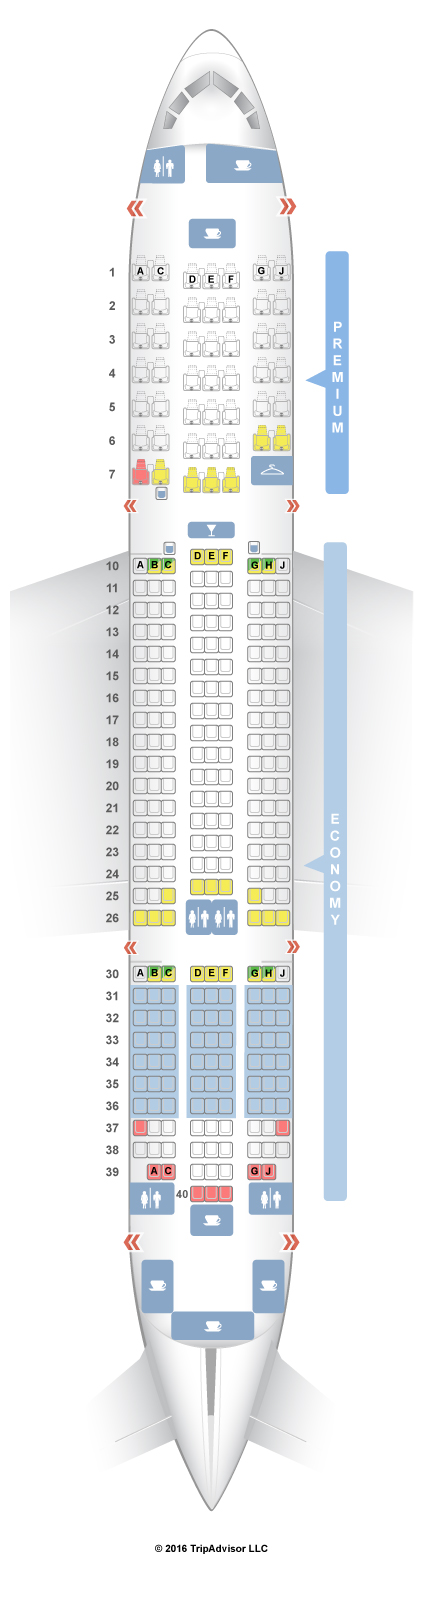 Boeing 787 Seating Chart